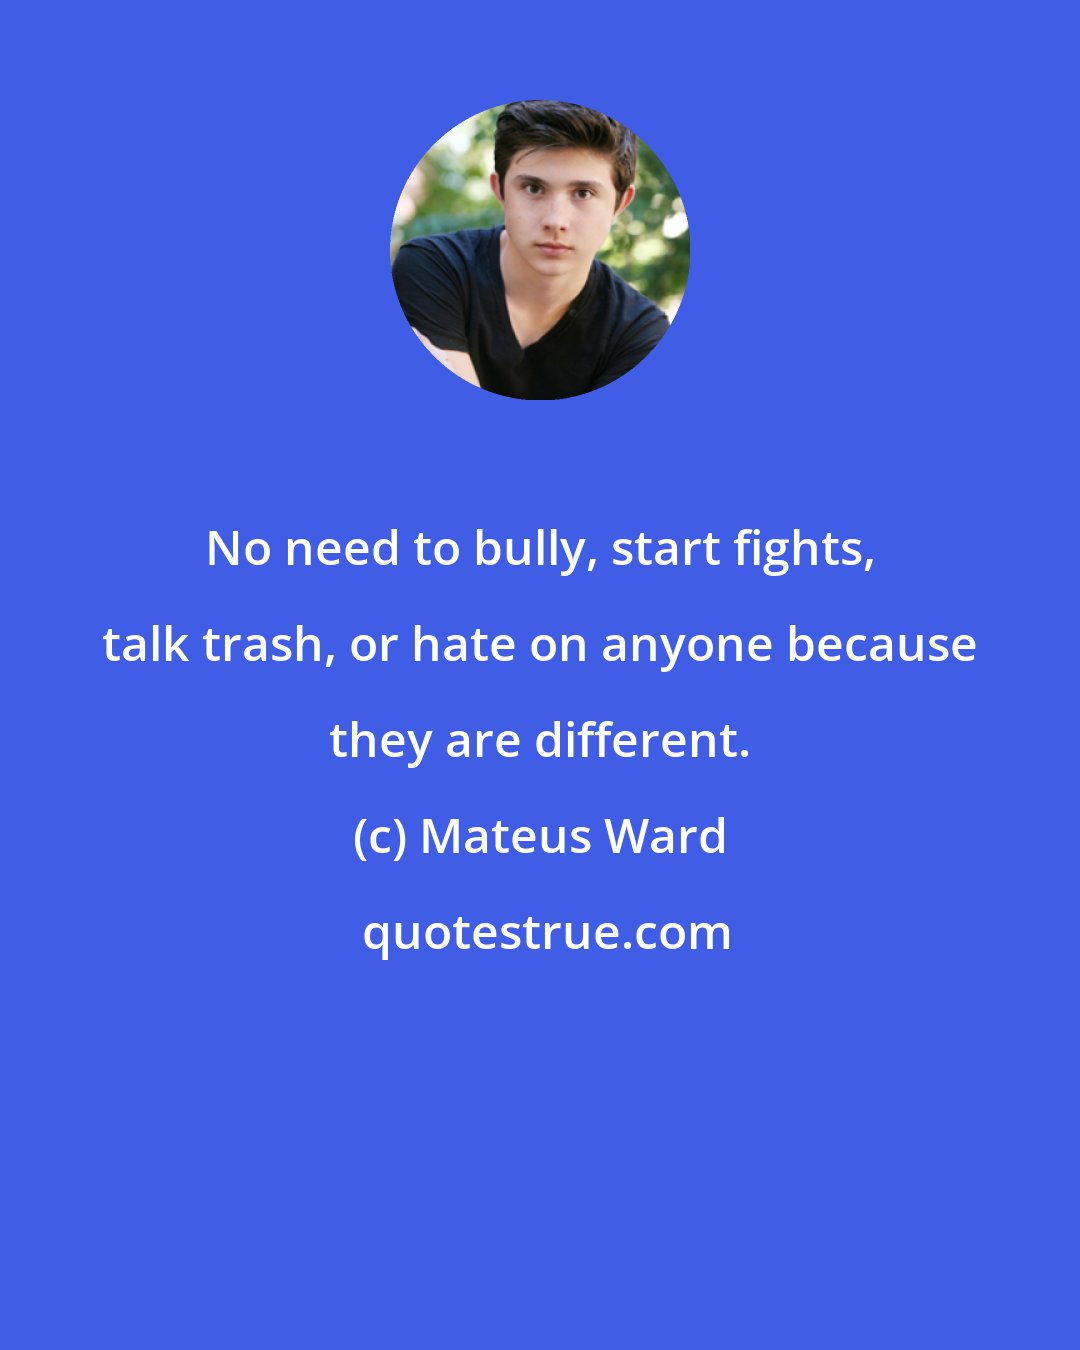 Mateus Ward: No need to bully, start fights, talk trash, or hate on anyone because they are different.